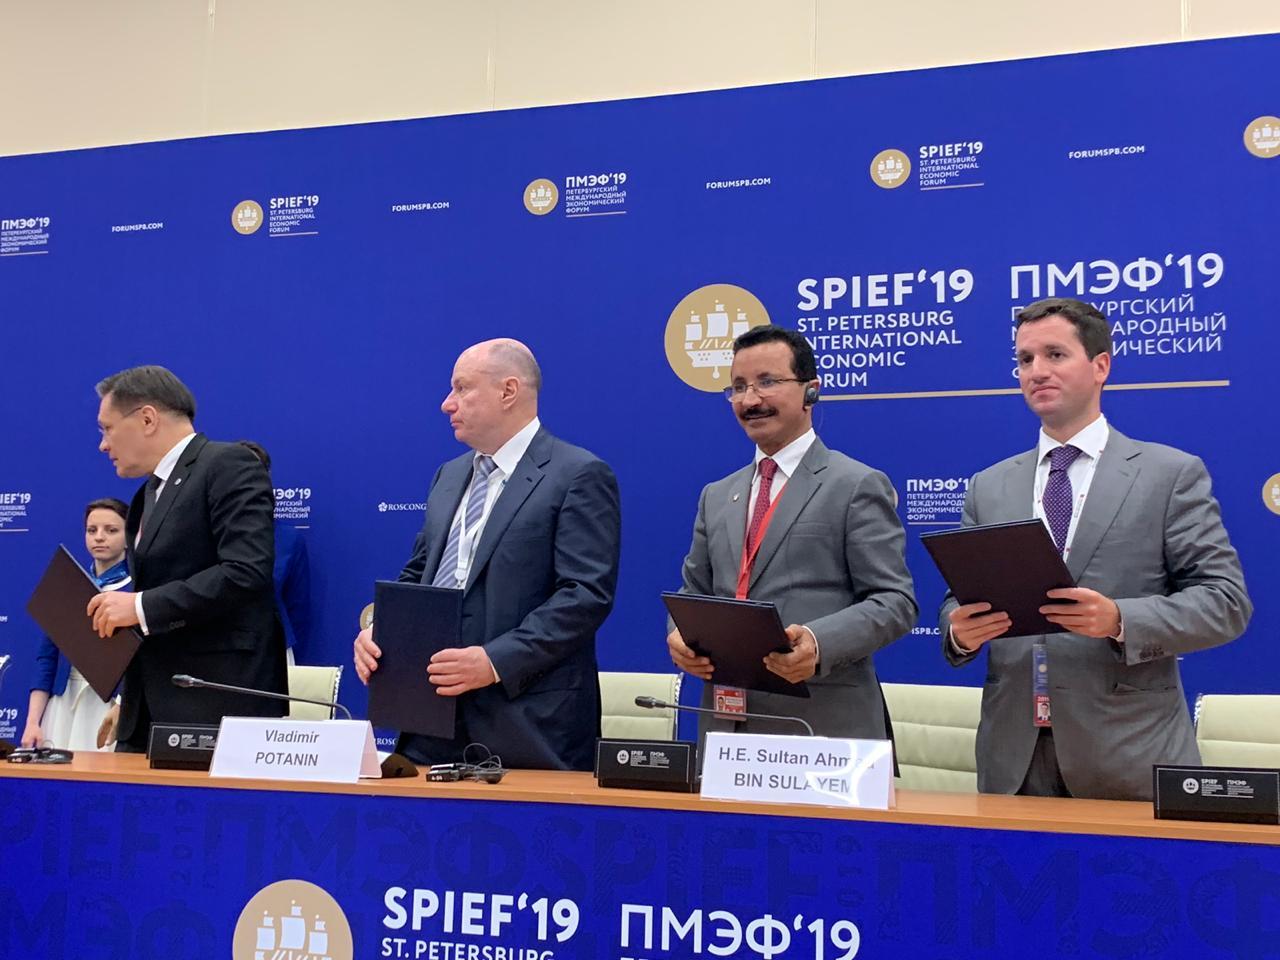 RDIF, Nornikel, ROSATOM and DP World signing ceremony